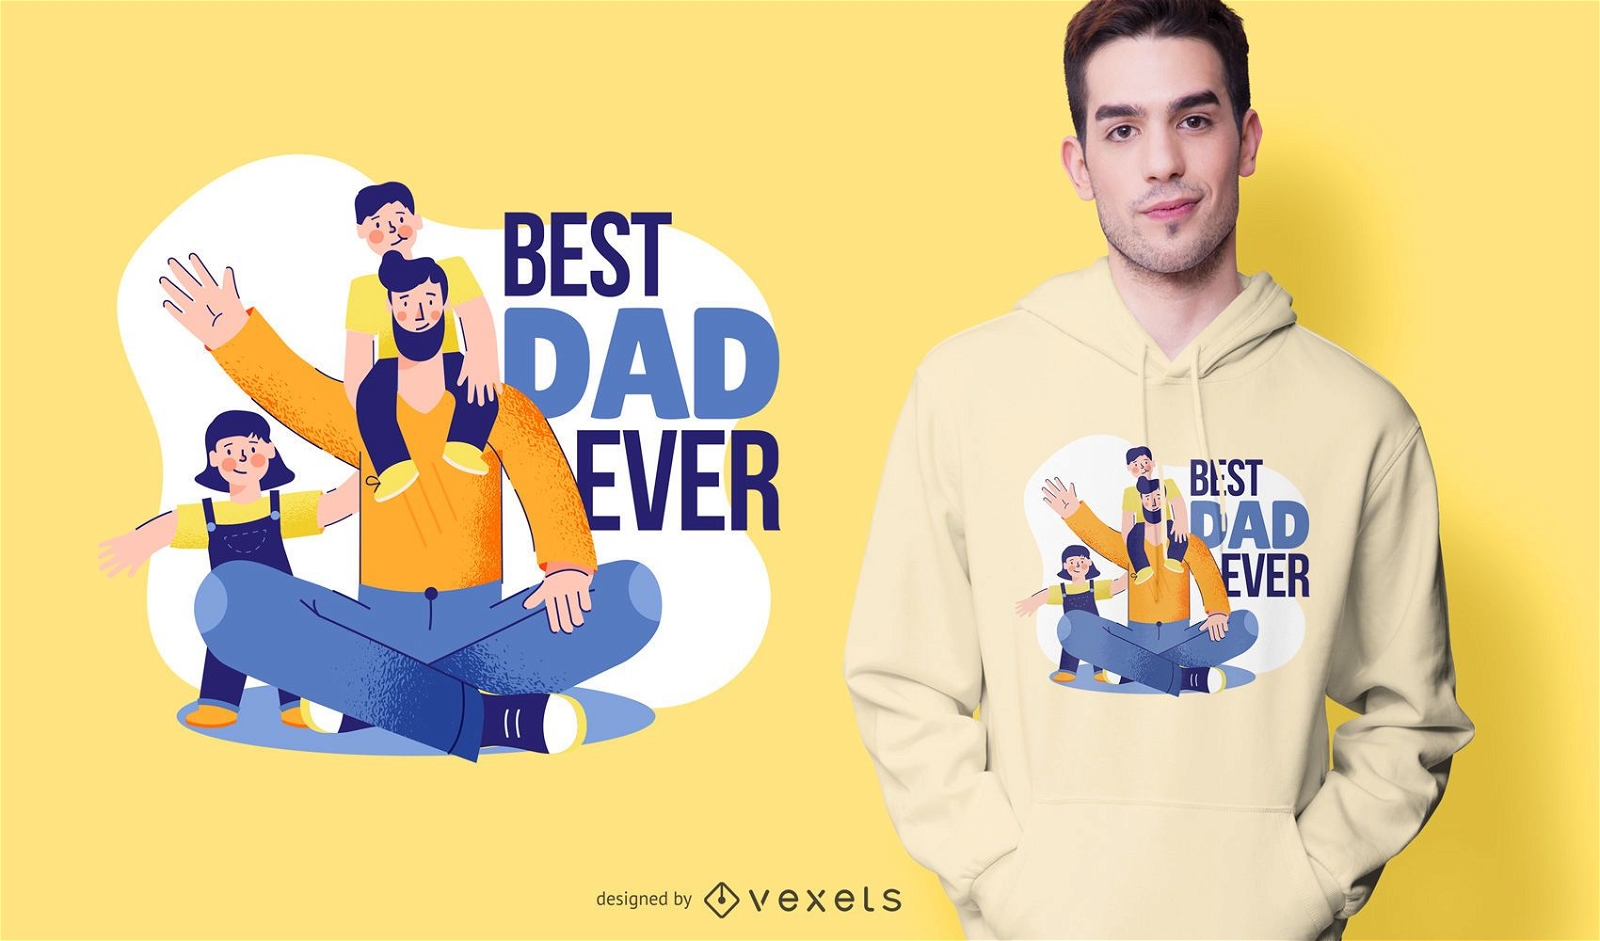 Father son's first hero daughter's first love Memphis Grizzlies basketball  logo shirt, hoodie, sweater, longsleeve and V-neck T-shirt